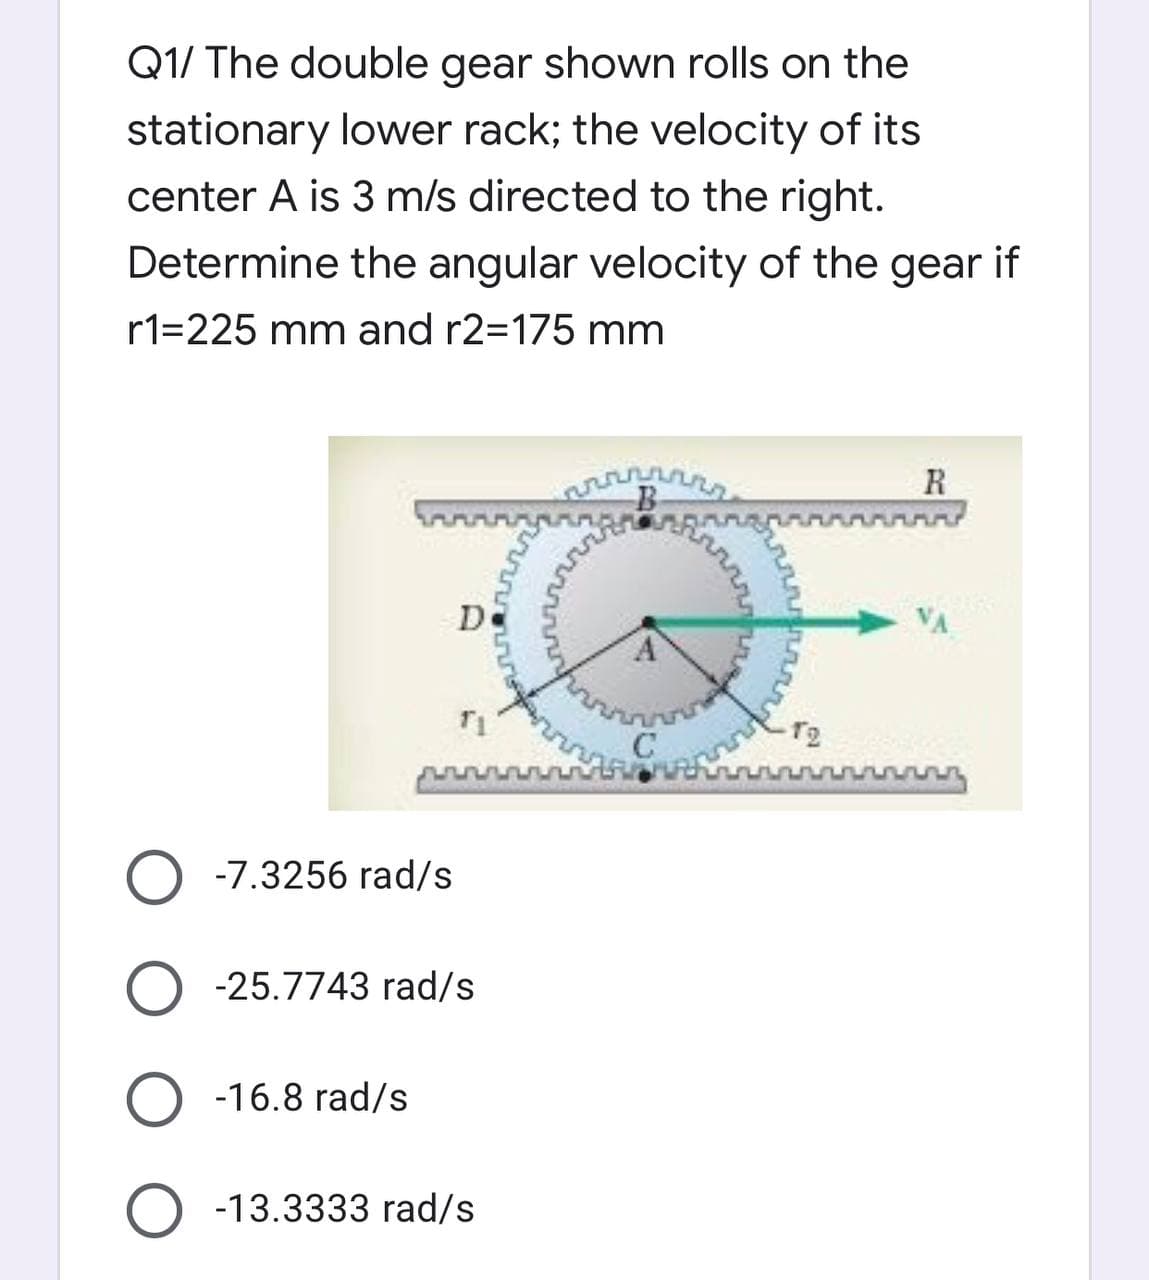 Q1/ The double gear shown rolls on the
stationary lower rack; the velocity of its
center A is 3 m/s directed to the right.
Determine the angular velocity of the gear if
r1=225 mm and r2=175 mm
R
B
www
D
T2
O -7.3256 rad/s
-25.7743 rad/s
O -16.8 rad/s
-13.3333 rad/s
